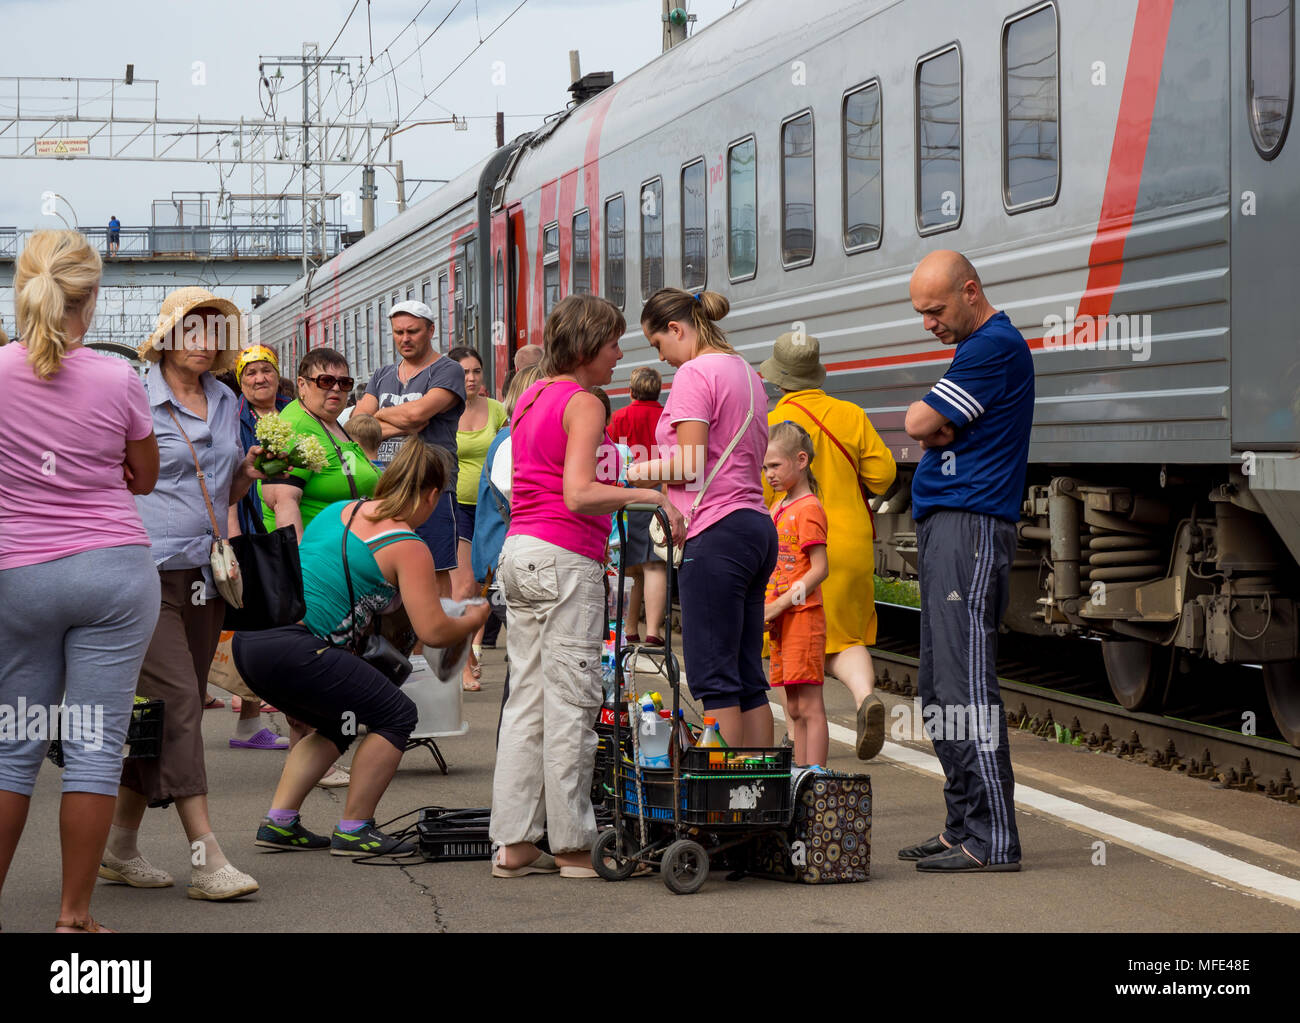 Petrozavodsk, Russia - June 18, 2017: Trade in products from trains at the railway station Petrozavodsk Stock Photo